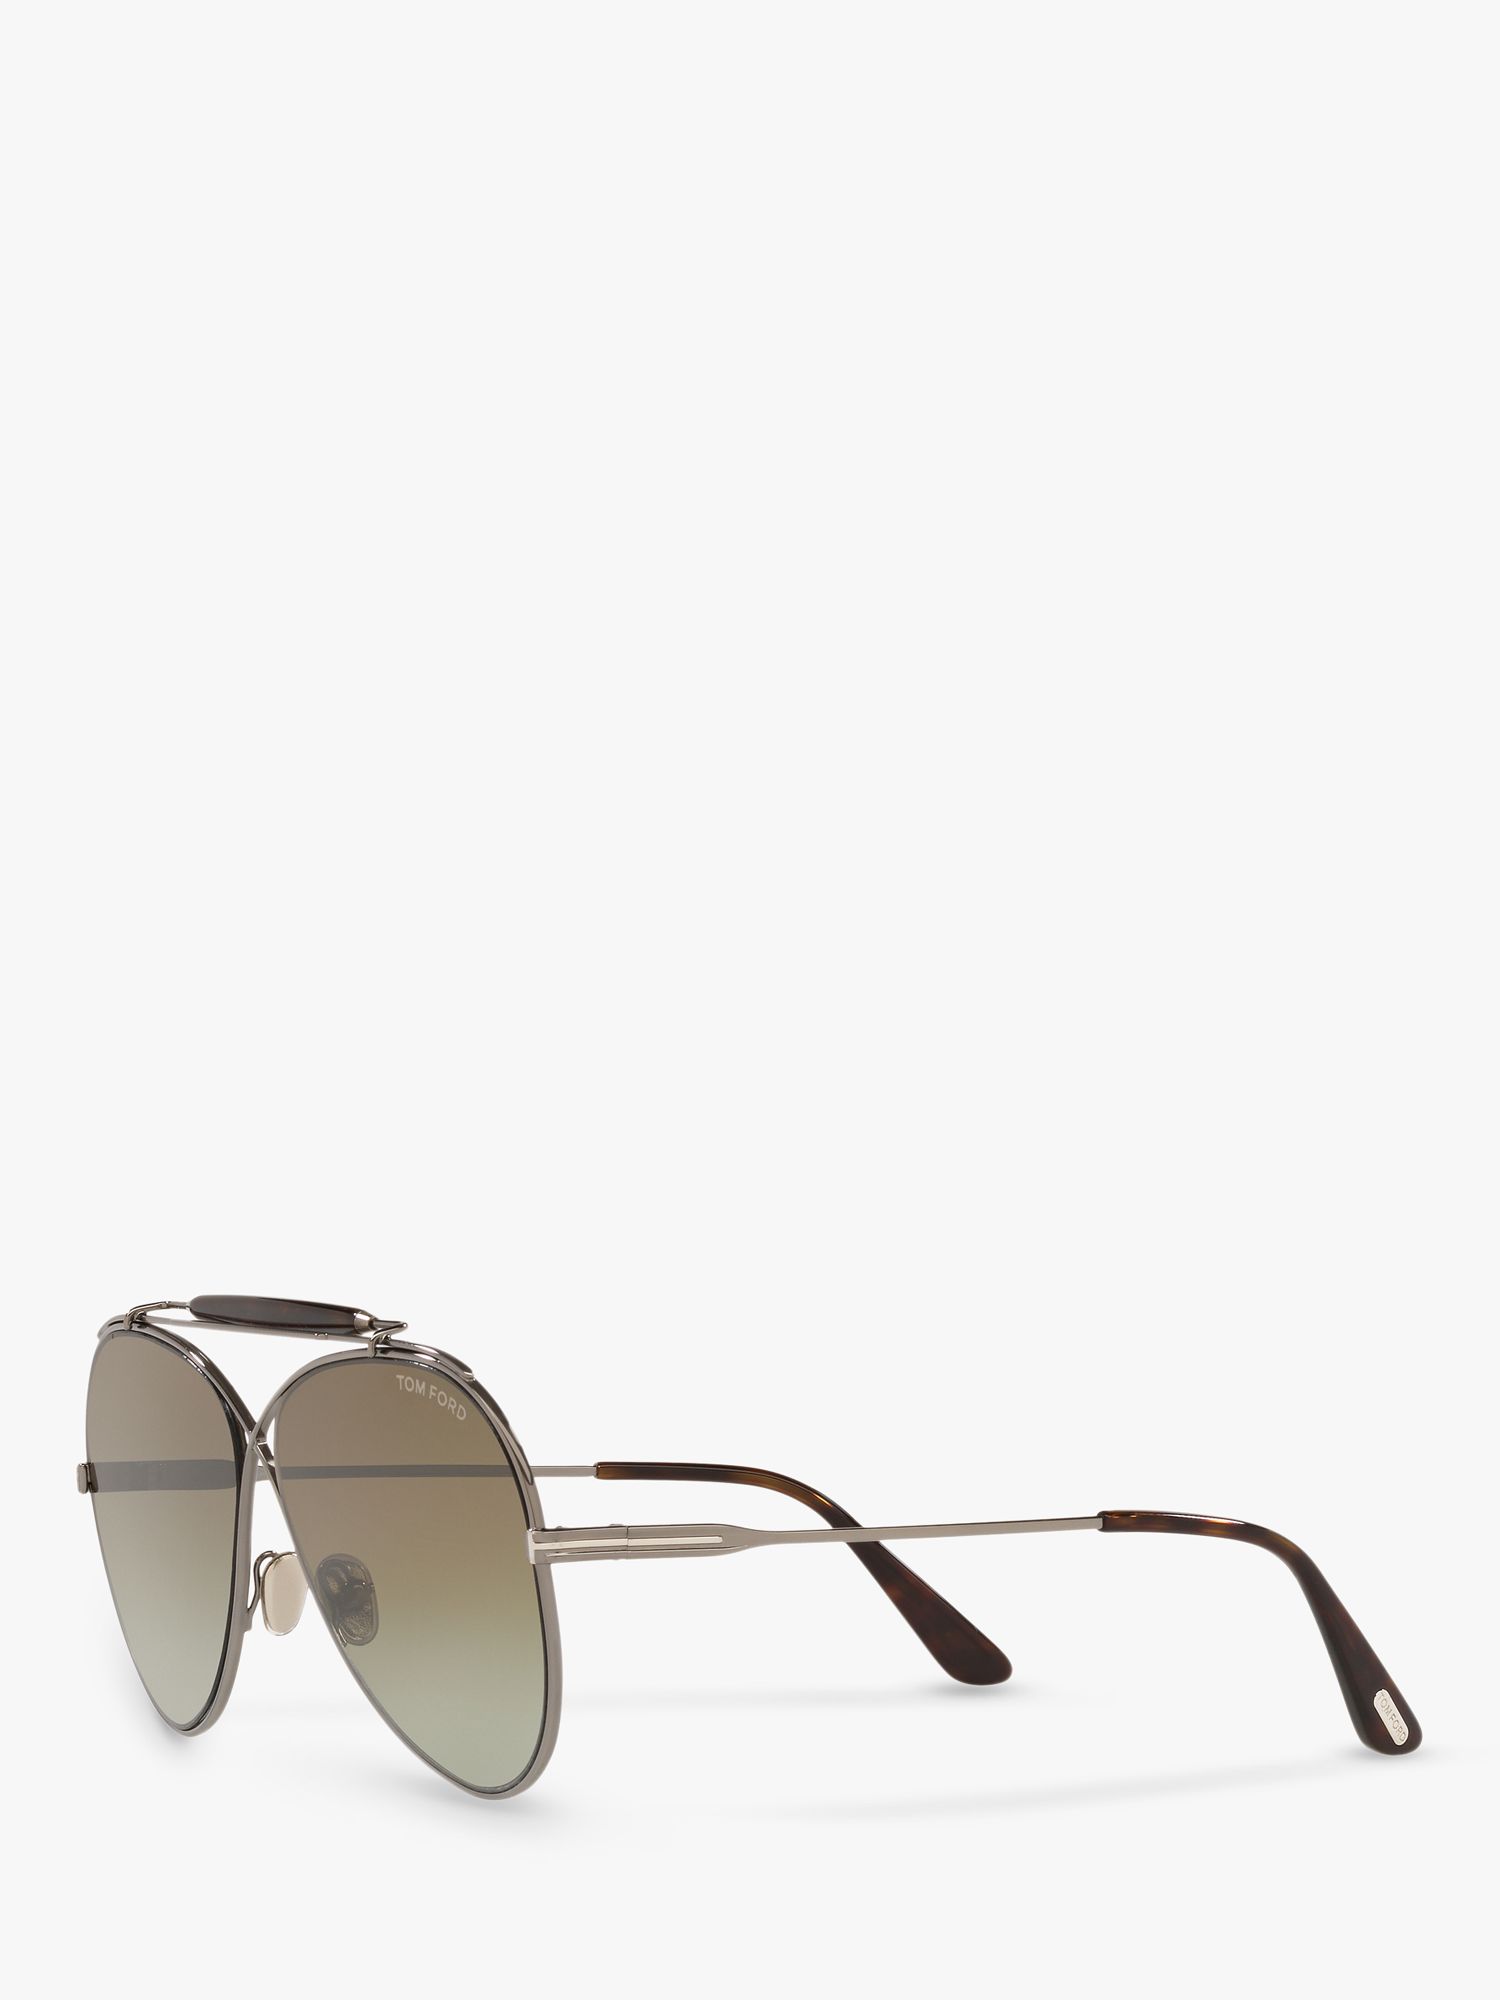 TOM FORD FT0818 Unisex Holden Aviator Sunglasses, Gold/Mirror Brown at ...